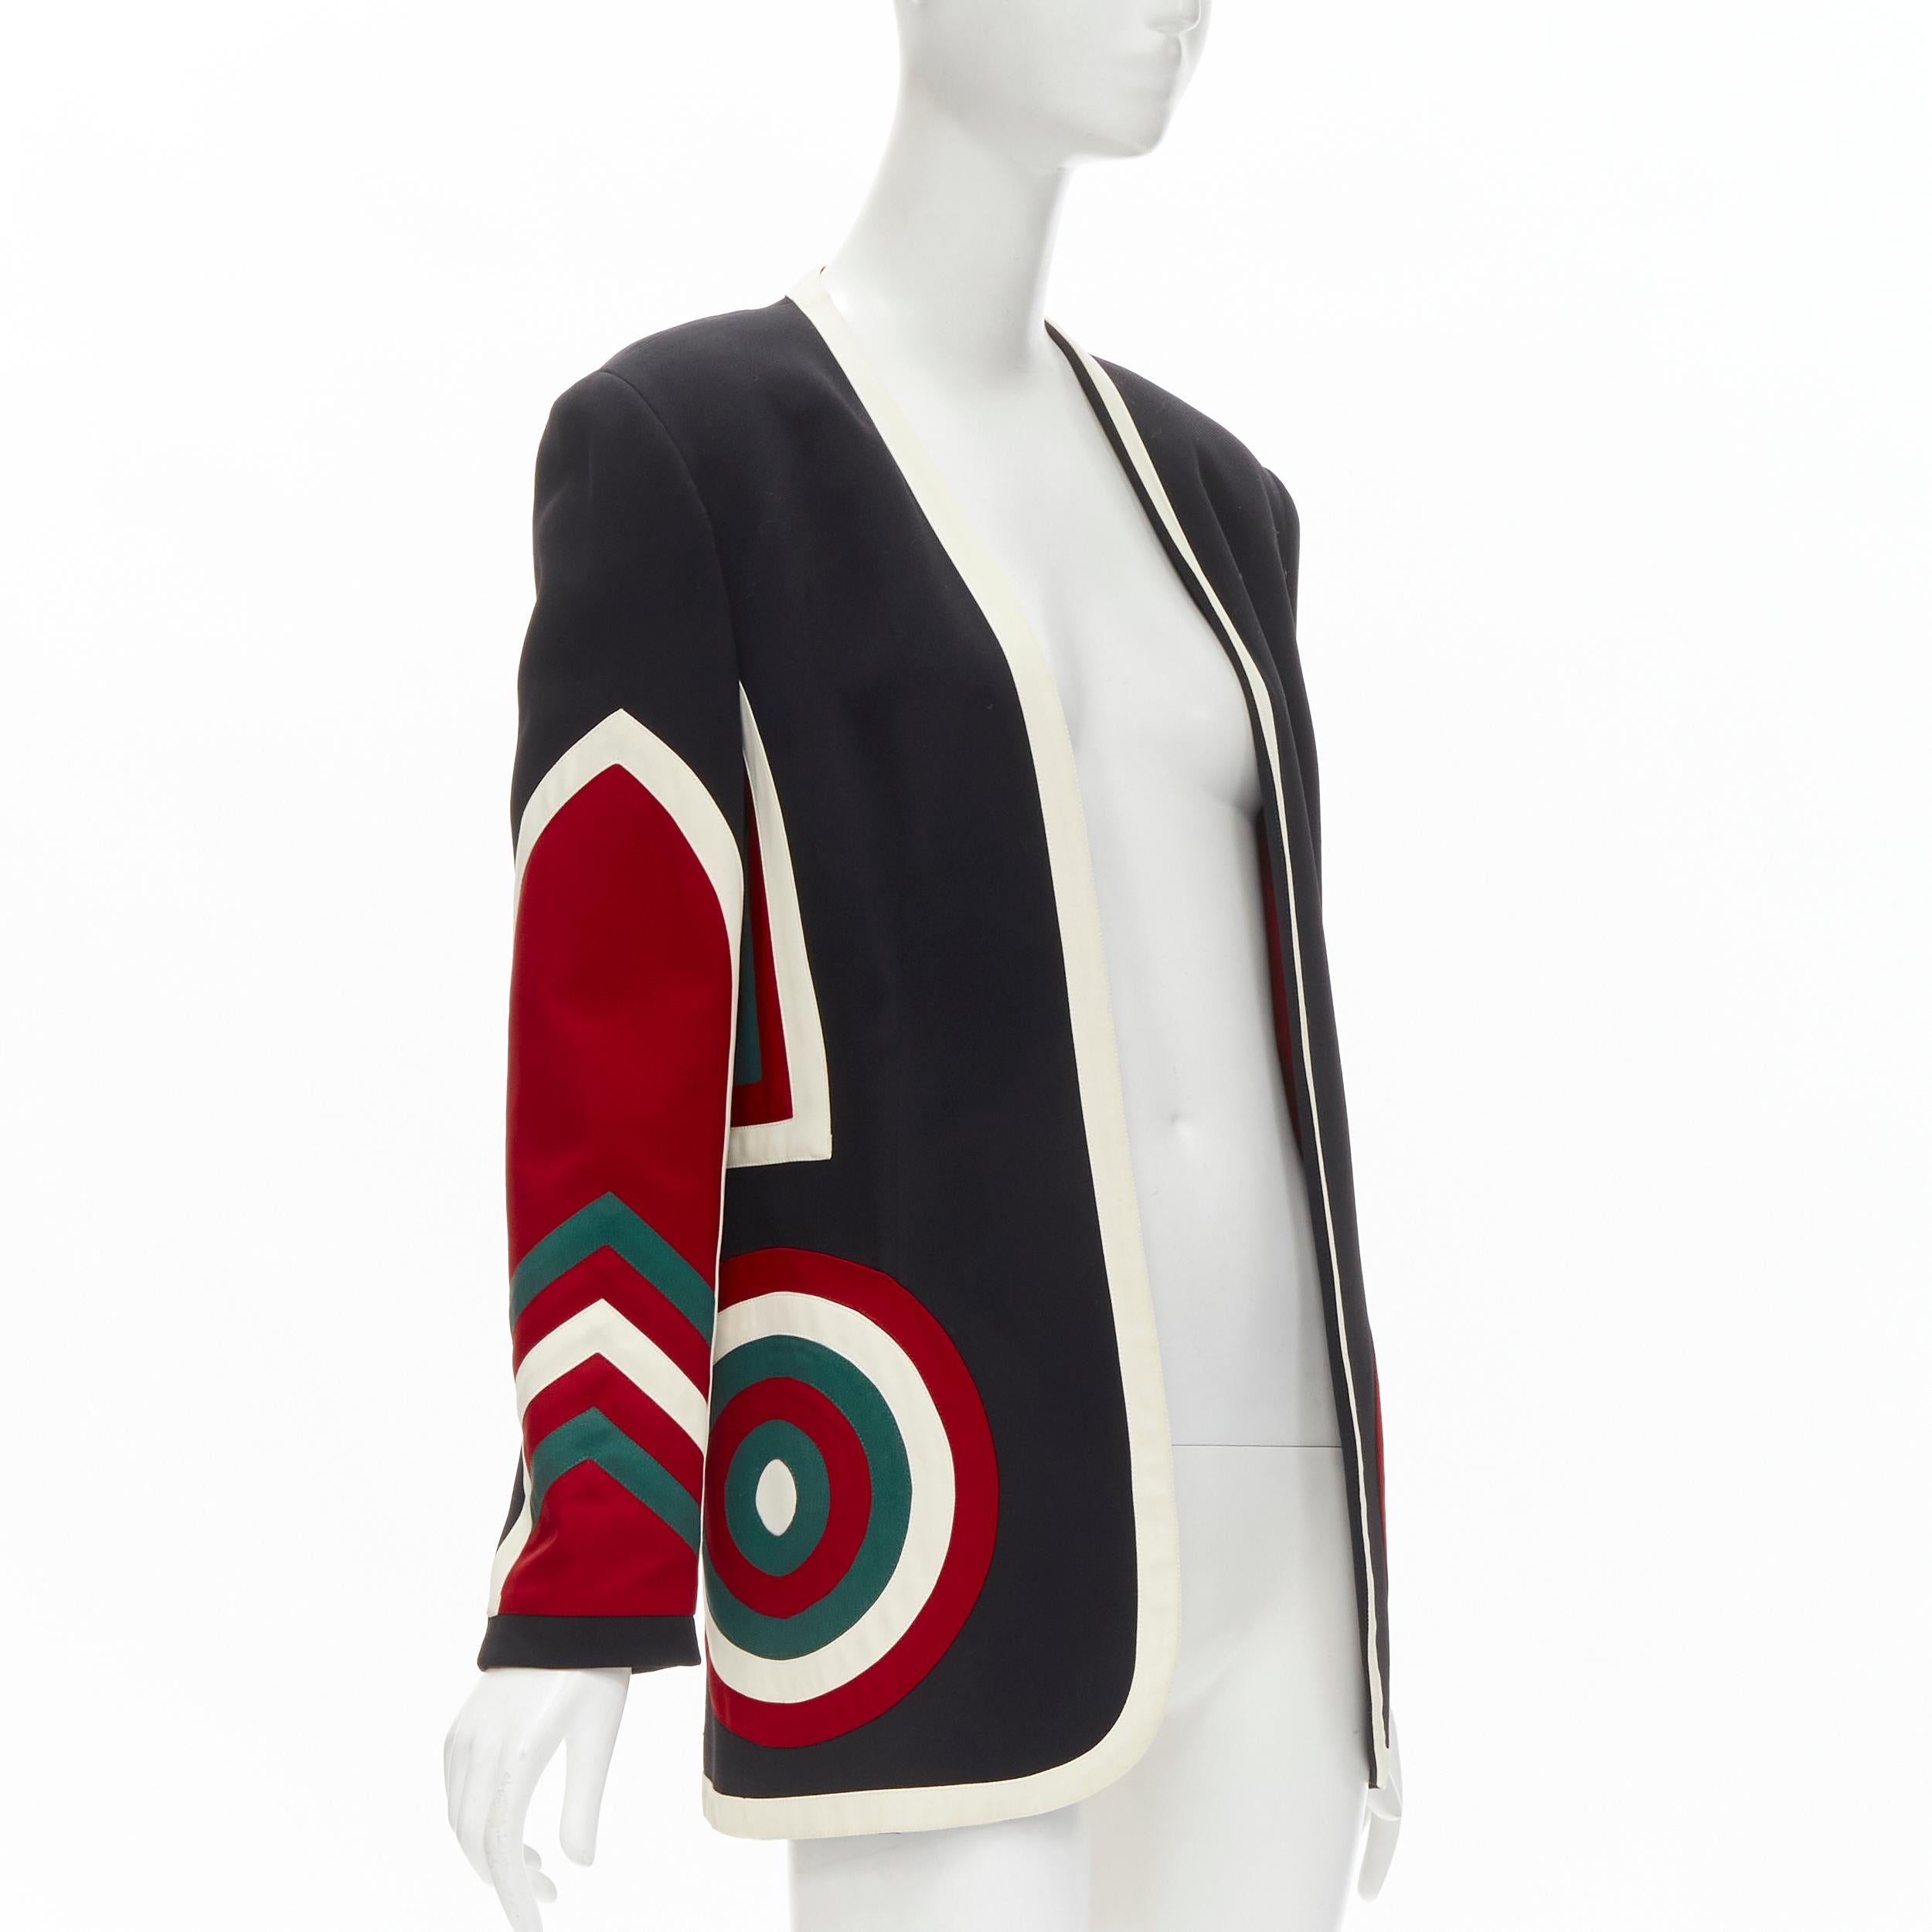 MOSCHINO COUTURE! black red creoe Star Bullseye geometric blazer IT42 L
Brand: Moschino
Designer: Jeremy Scott
Material: Acetate
Color: Black
Pattern: Solid
Extra Detail: Dartboard circle pockets at front. Collarless. Geometric pattern on sleeves.